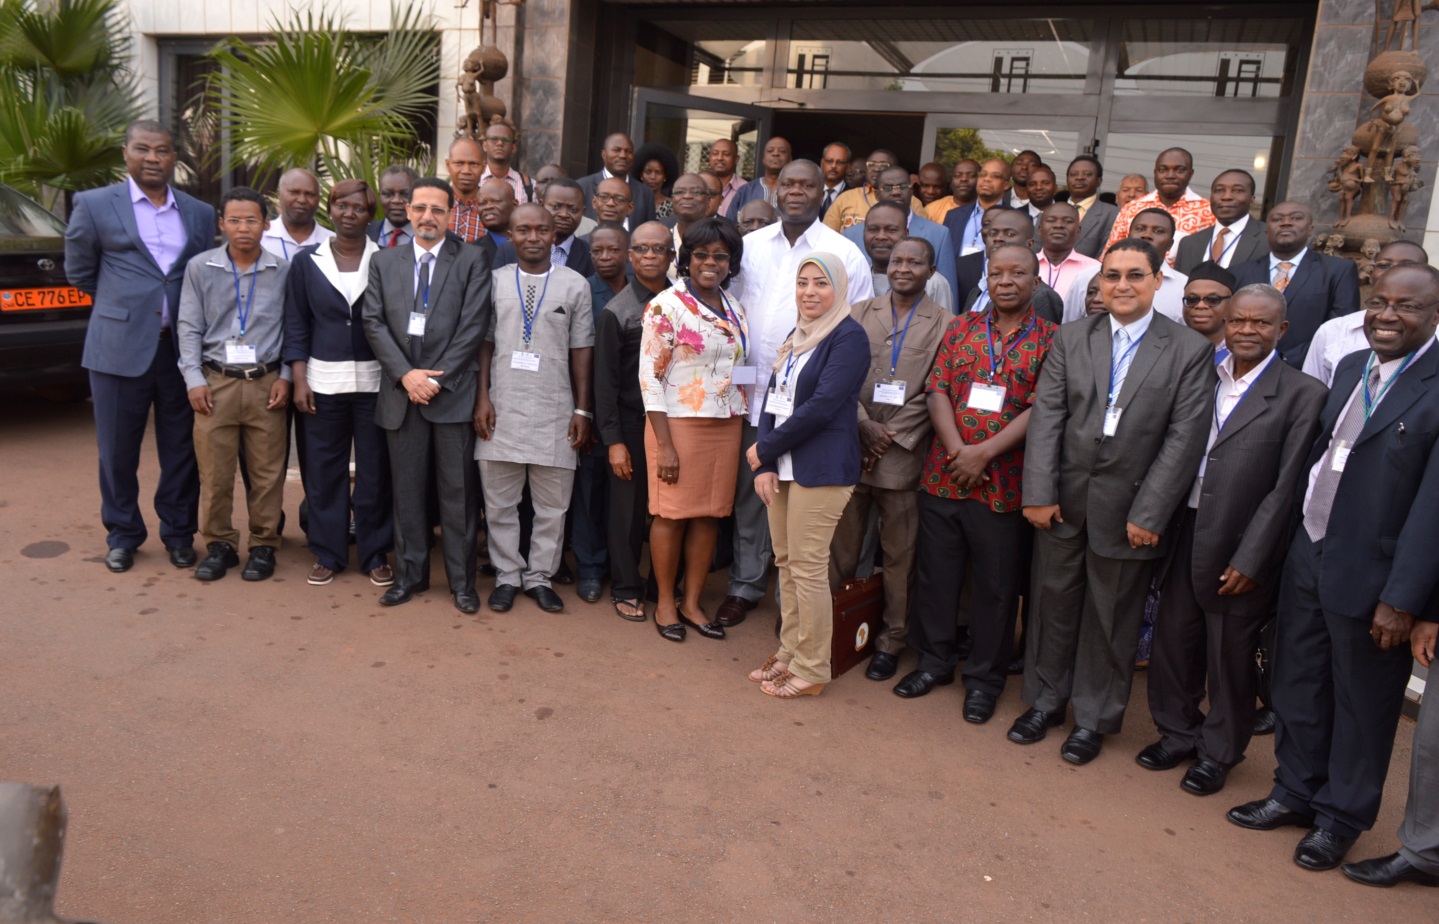  © 2016 AU-IBAR. Group photo of participants at the experts meeting to develop innovative Public Private Partnership models to promote improved management and sustainabilityin small-scale fisheries and aquaculture.